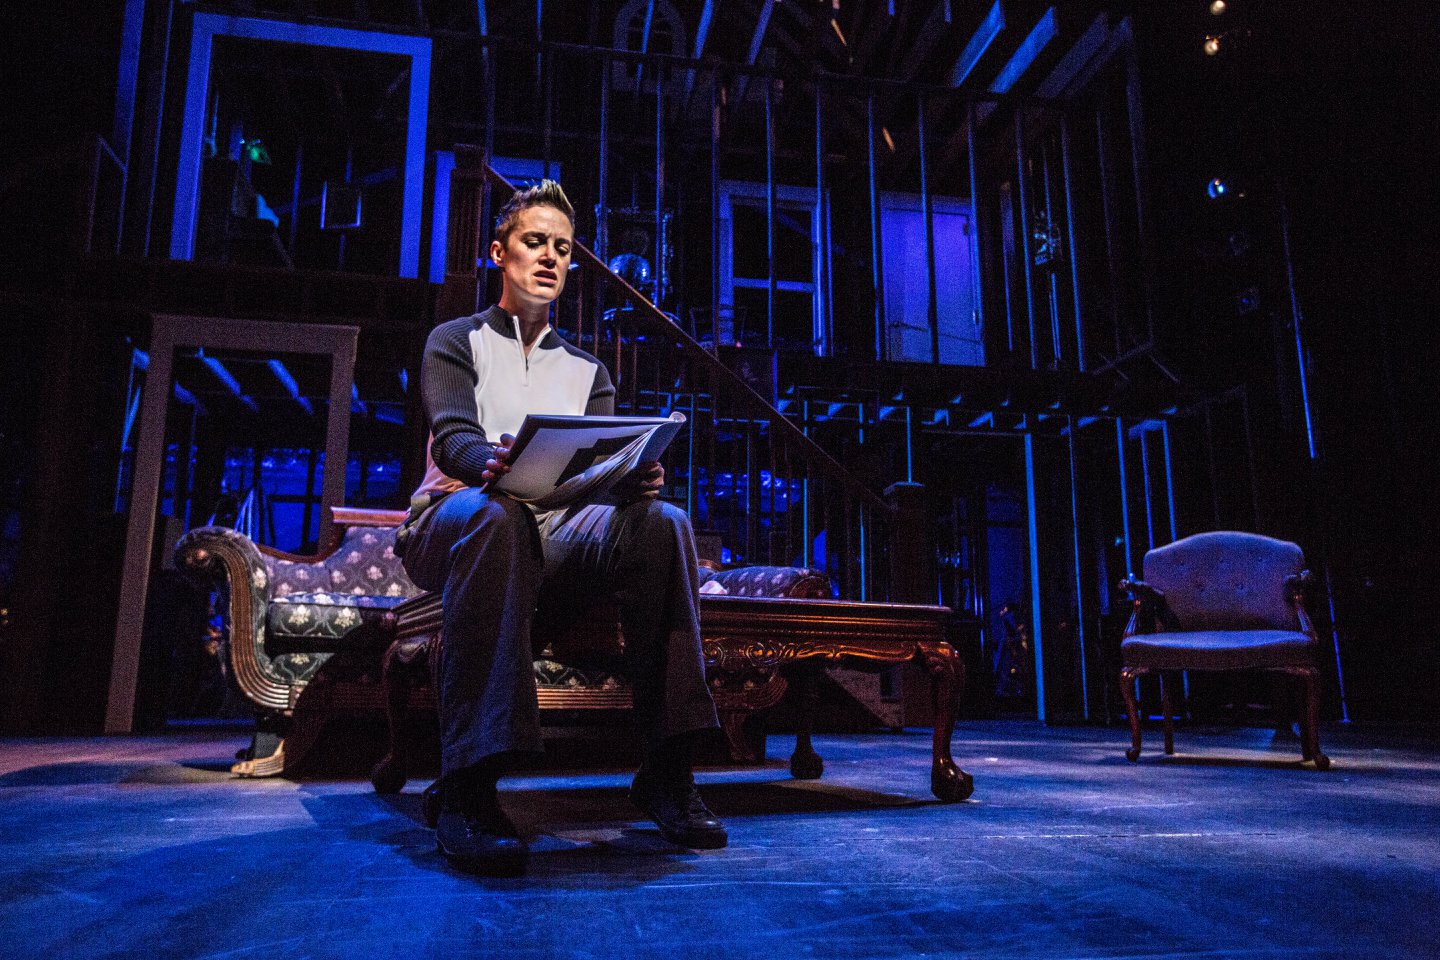 Joy Brooke Fairfield on stage as Alison Bechdel in Fun Home